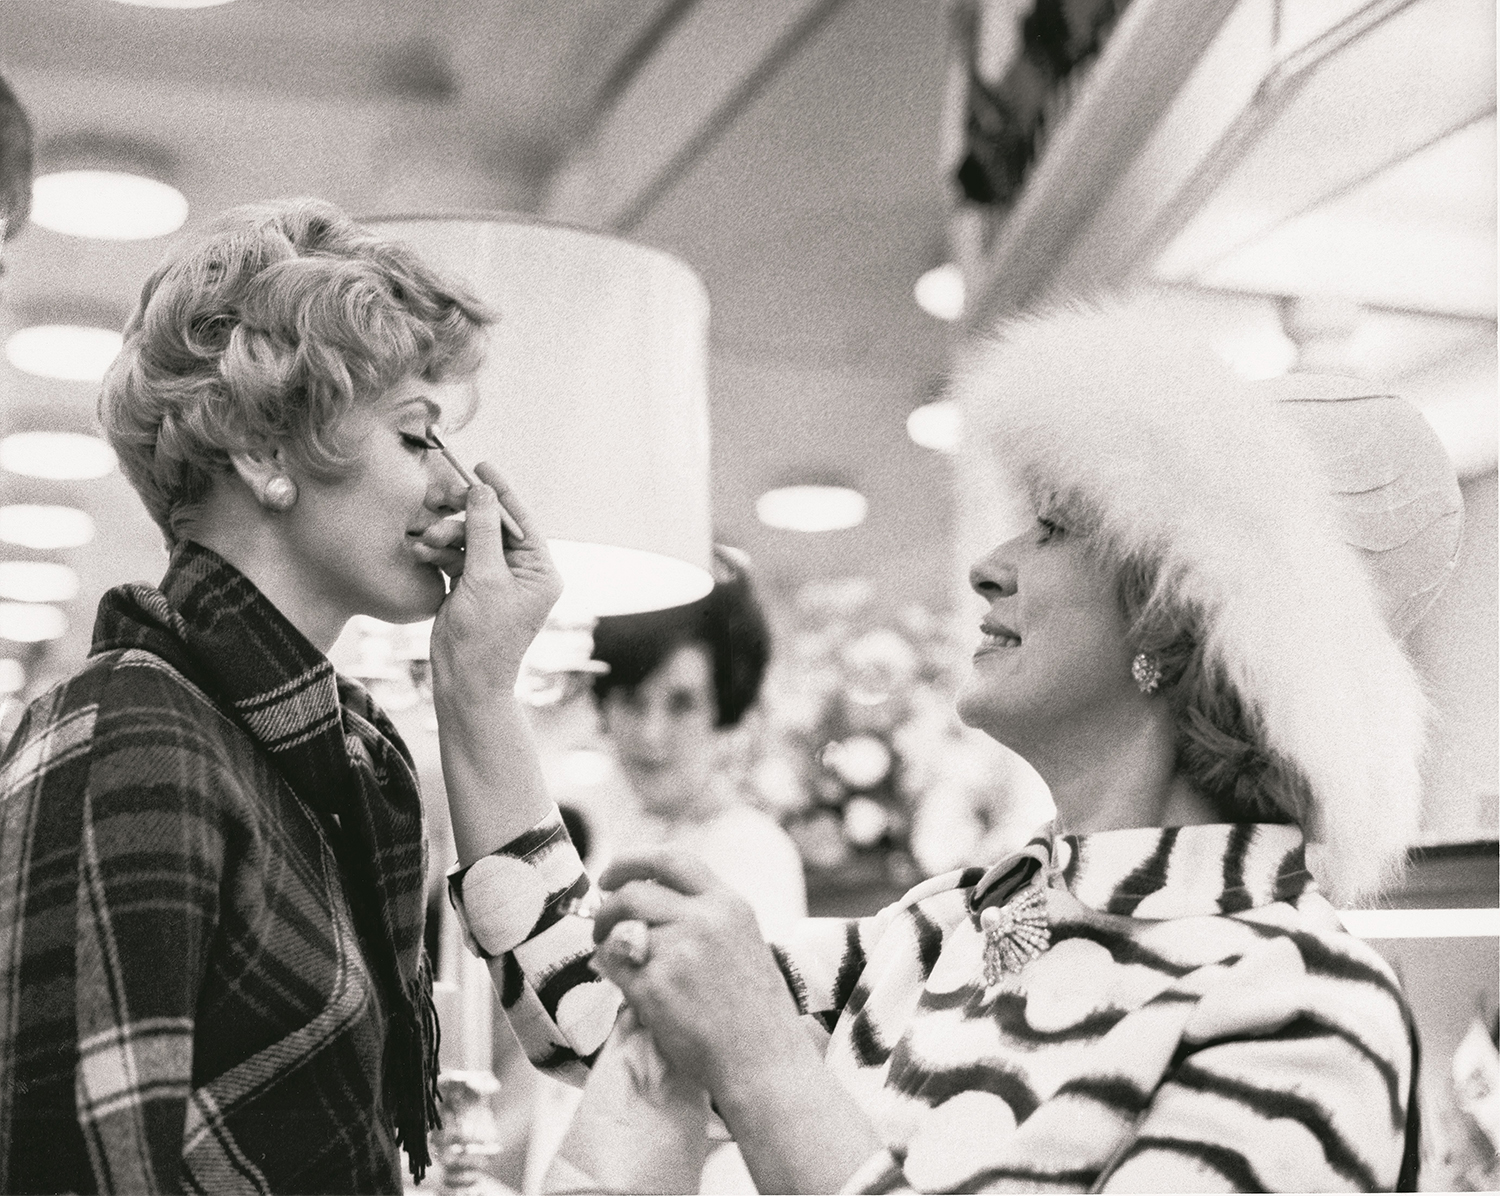 Photographic History of Estee Lauder from the WWD Archives [PHOTOS] – WWD